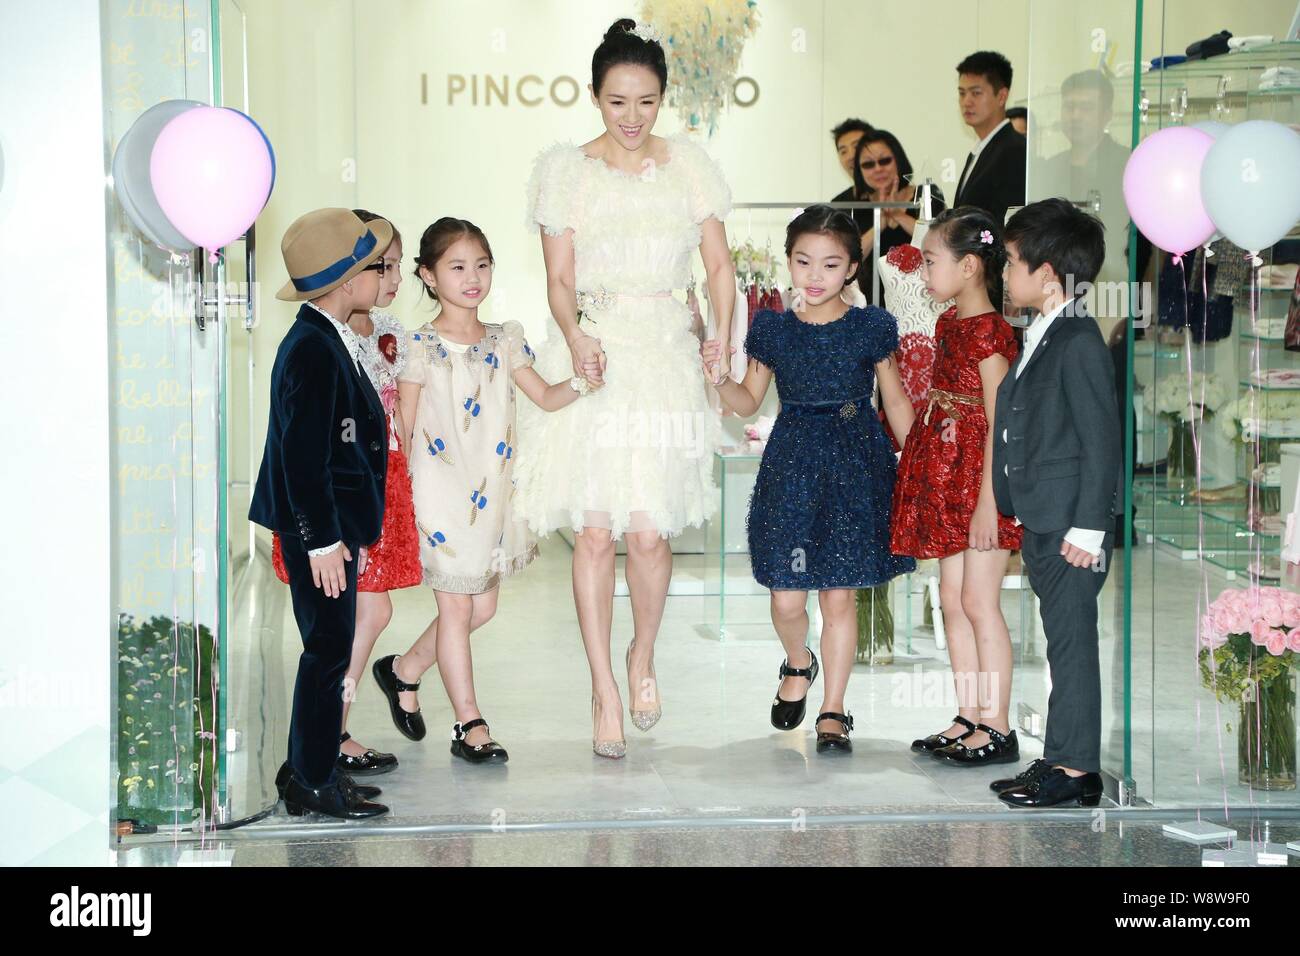 Chinese actress Zhang Ziyi, center, arrives with young kids at the opening ceremony for the new store of Italian luxury children's wear brand I PINCO Stock Photo